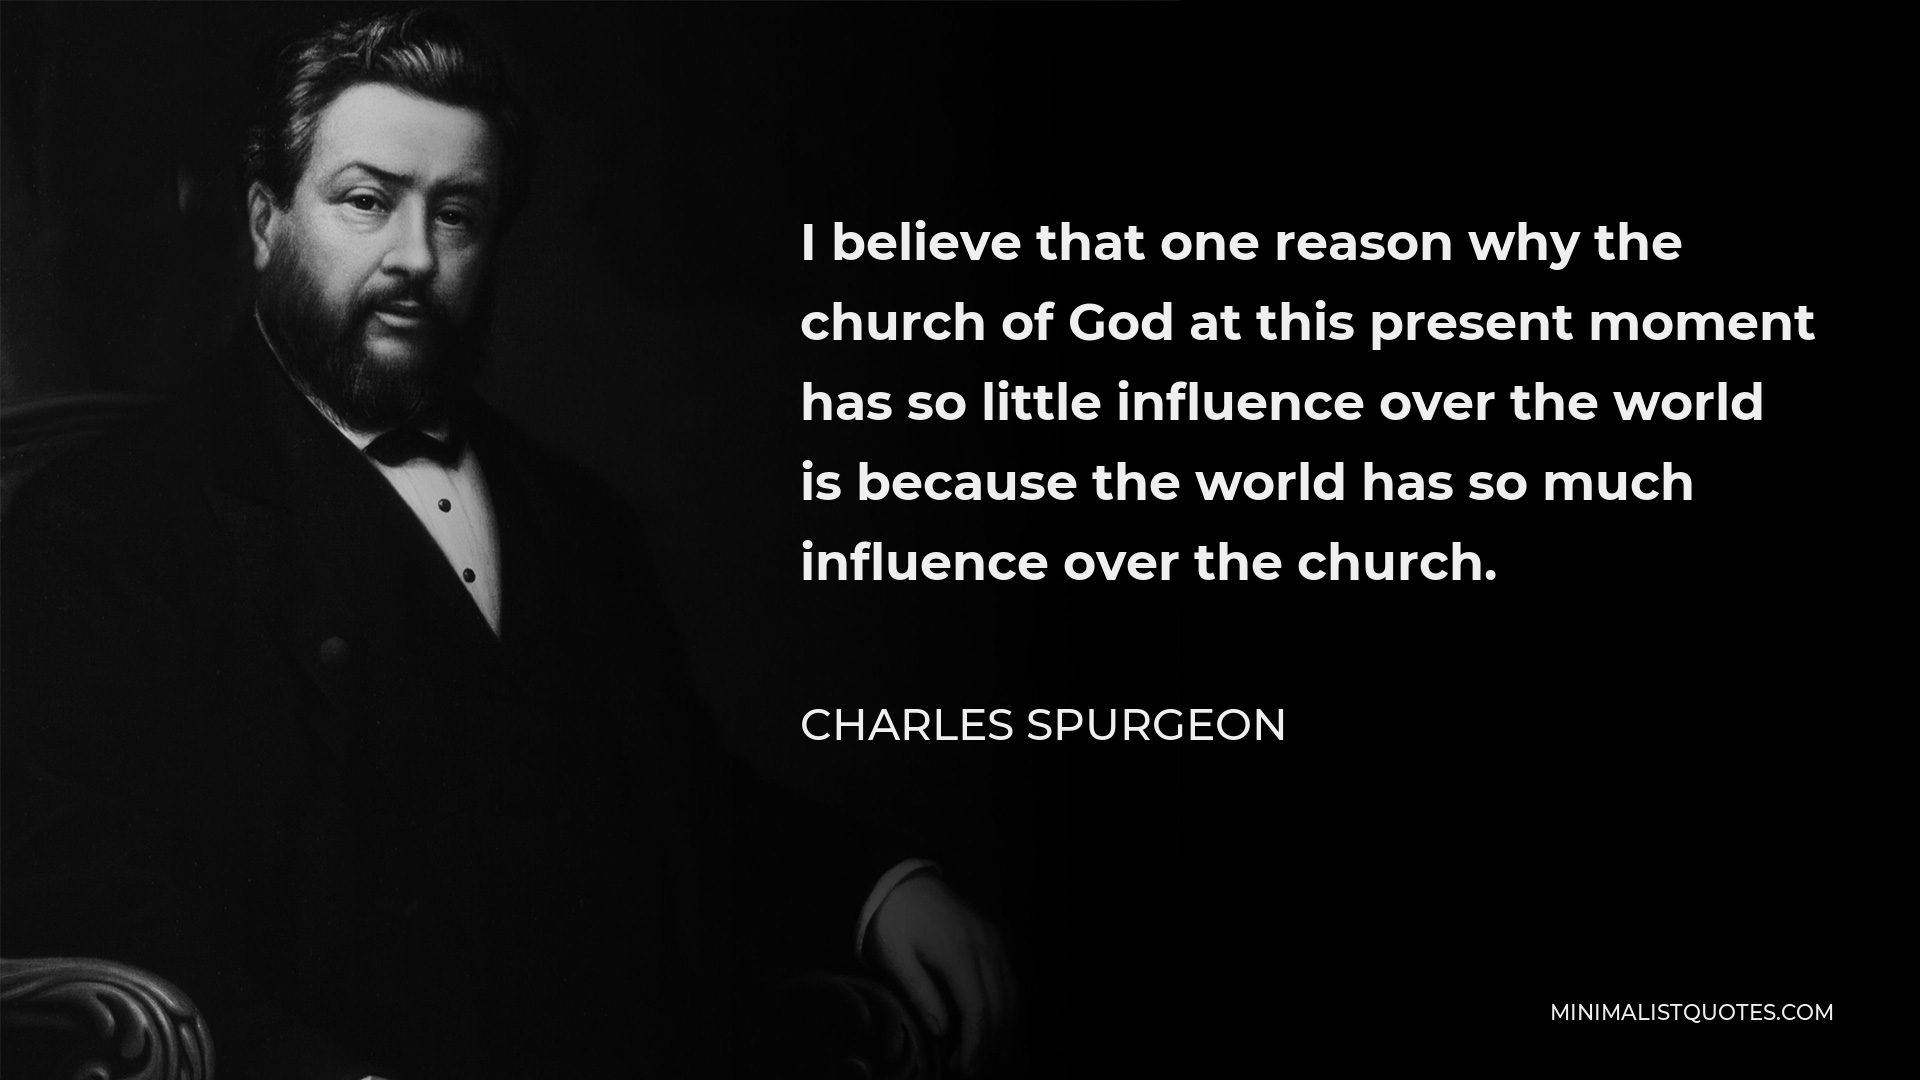 Charles Spurgeon Quote - I believe that one reason why the church of God at this present moment has so little influence over the world is because the world has so much influence over the church.